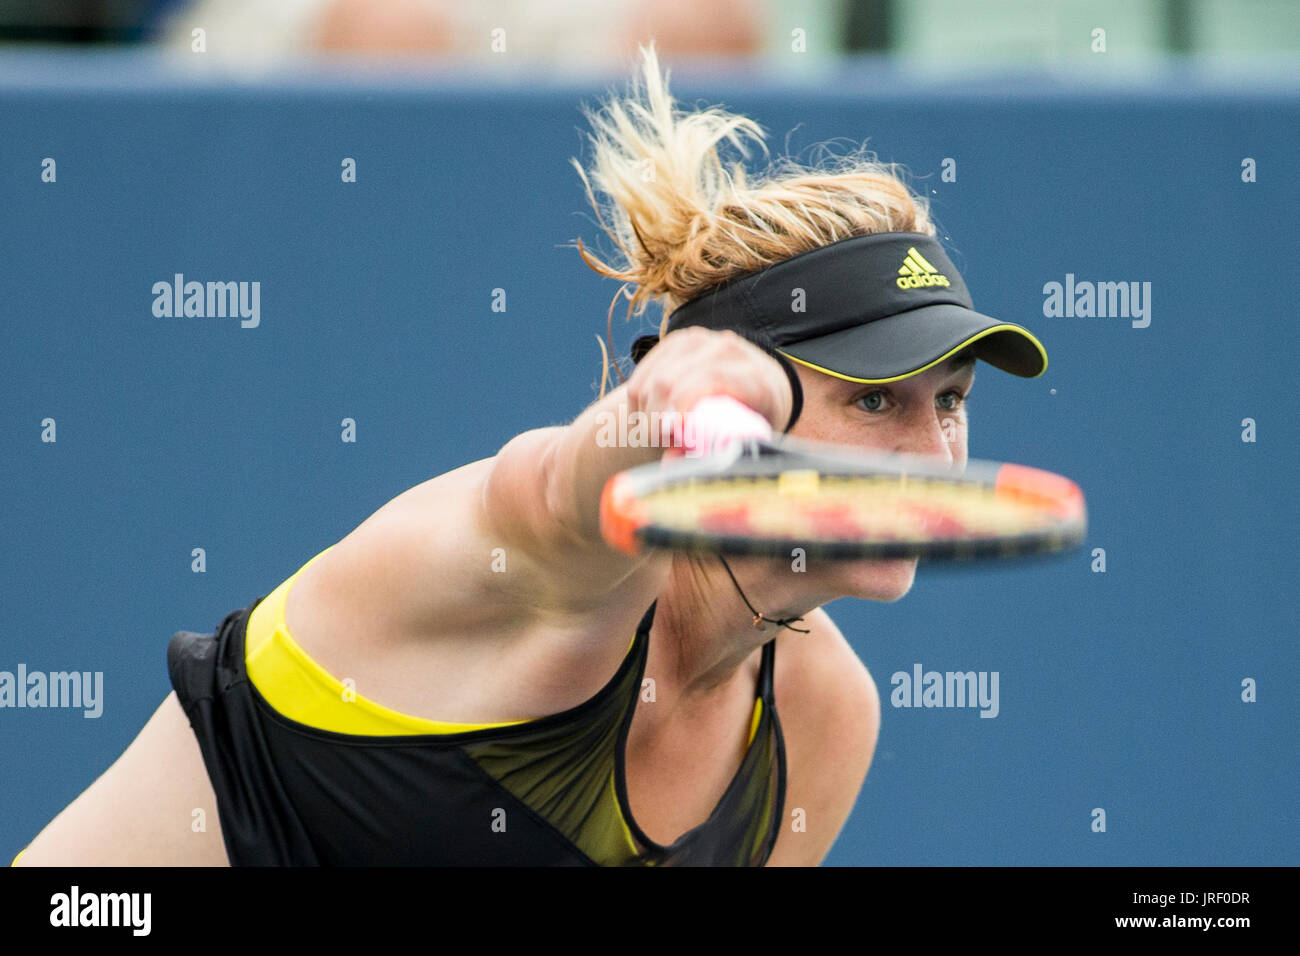 August 04, 2017: Anastasia Pavlyuchenkova (RUS) was defeated by CoCo Vandeweghe (USA) 6-2, 6-3 at the Bank of the West Classic being played at the Taube Tennis Stadium in Stanford, California. © Mal Taam/TennisClix Stock Photo